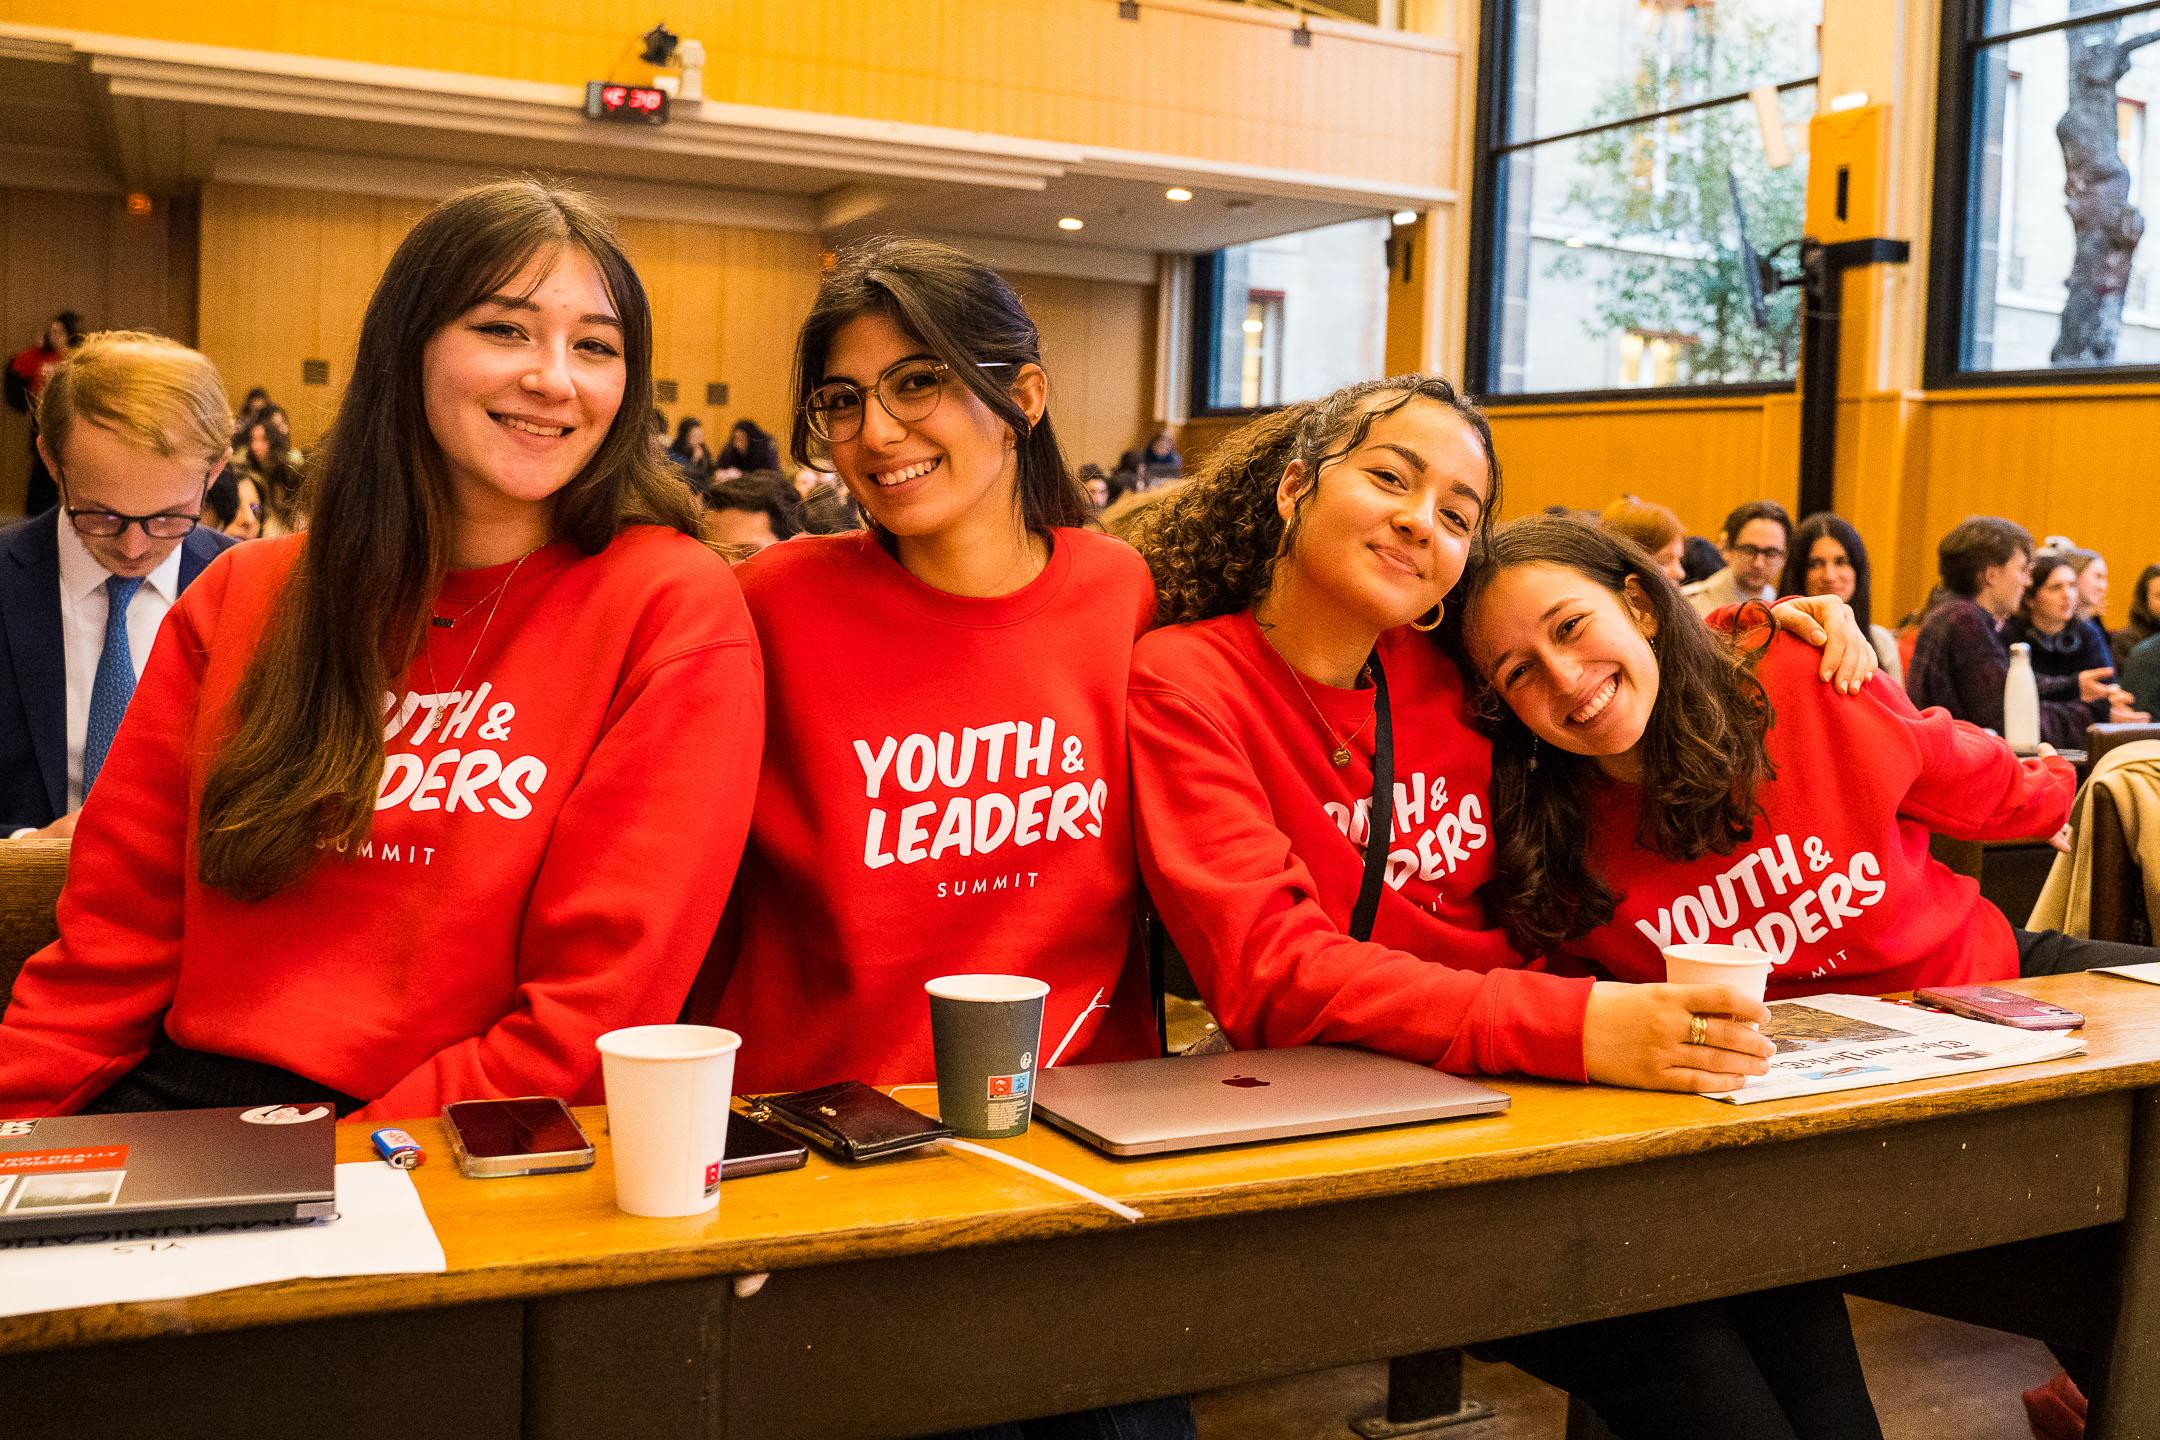 Sciences Po: Youth Leader Summit France